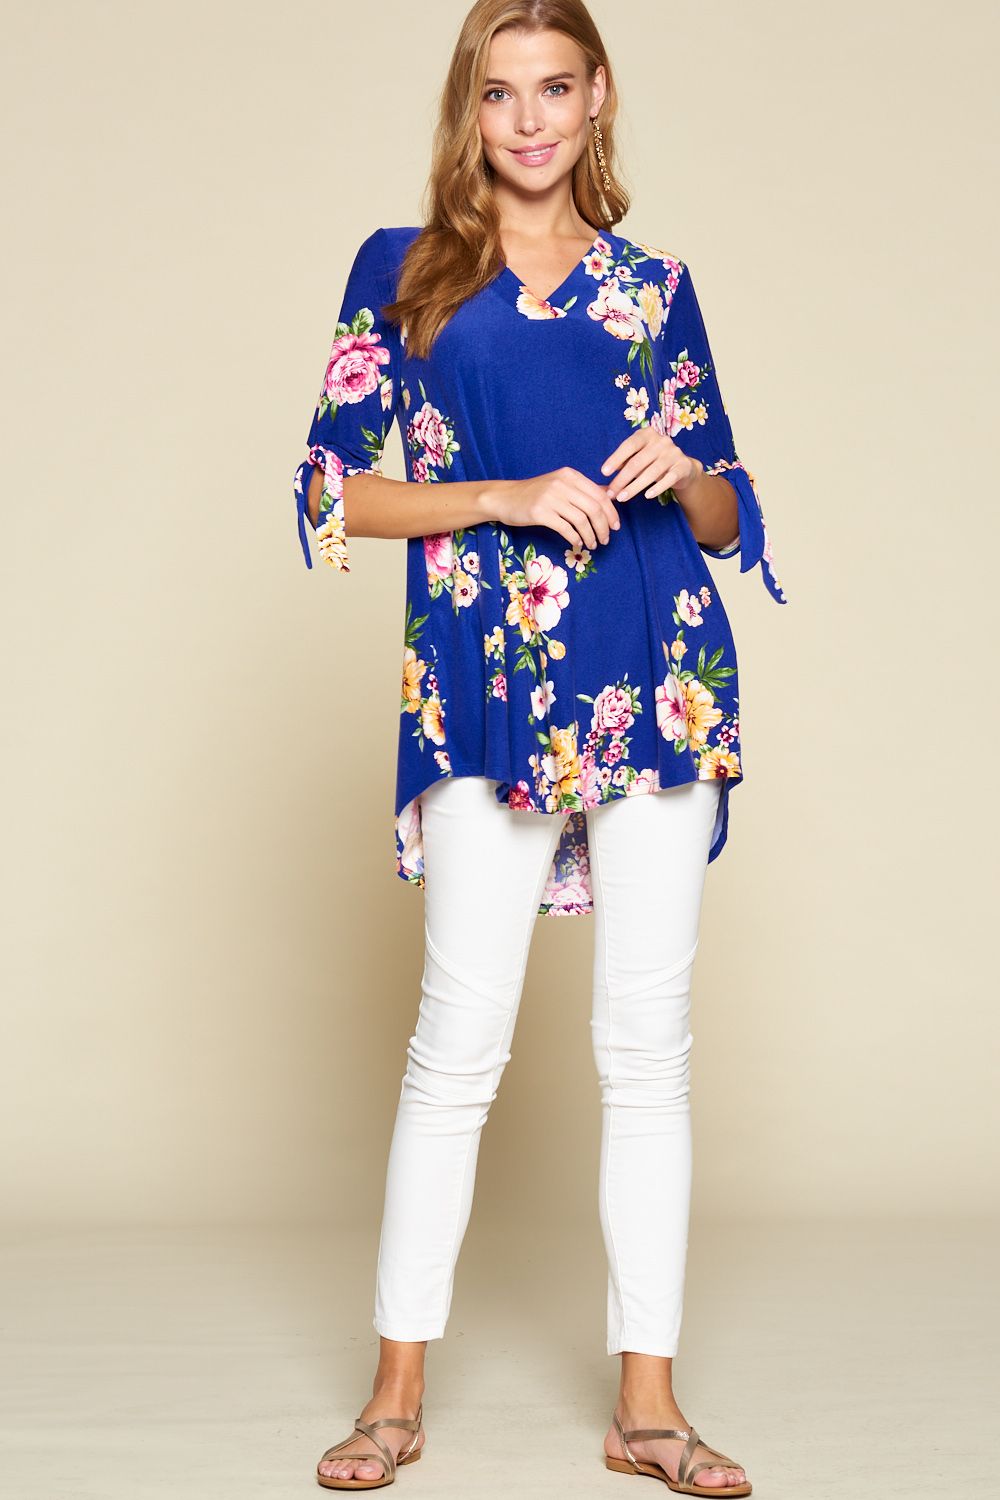 Floral Swing Top with Bow Sleeves